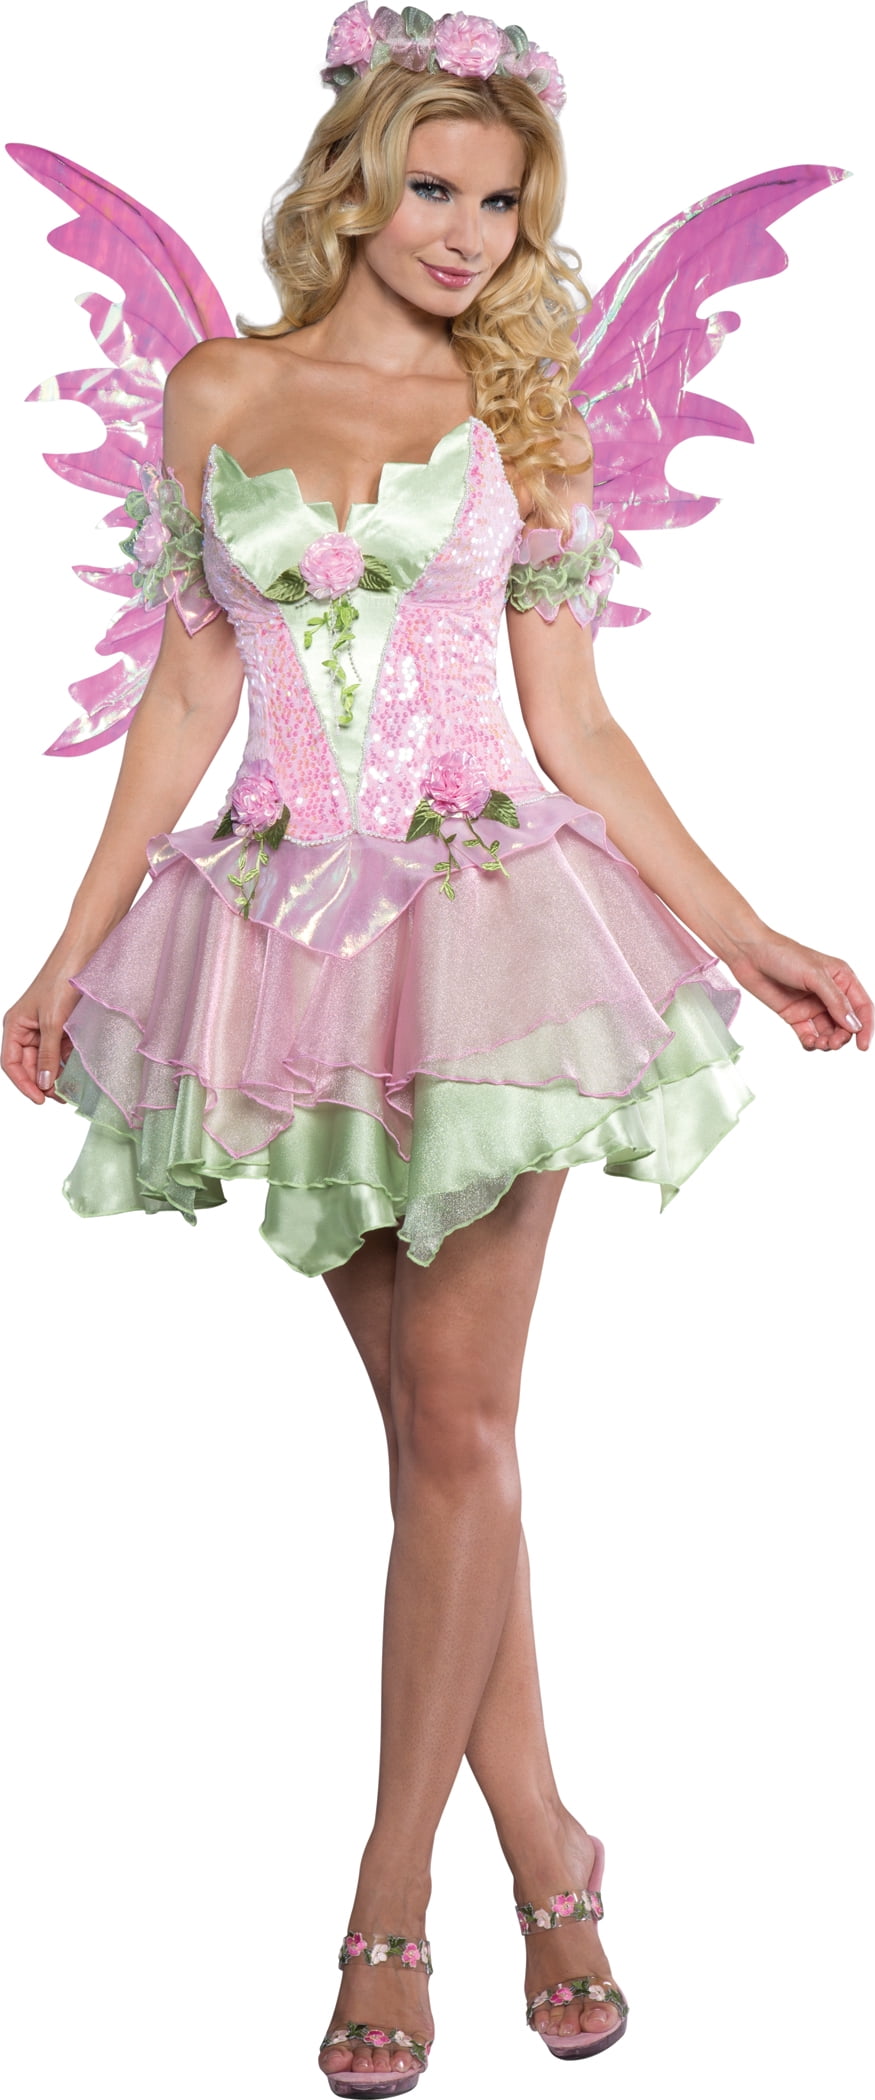 Ladies Adult Women Pinky Fancy Dress Outfits Angel Fairy Costume